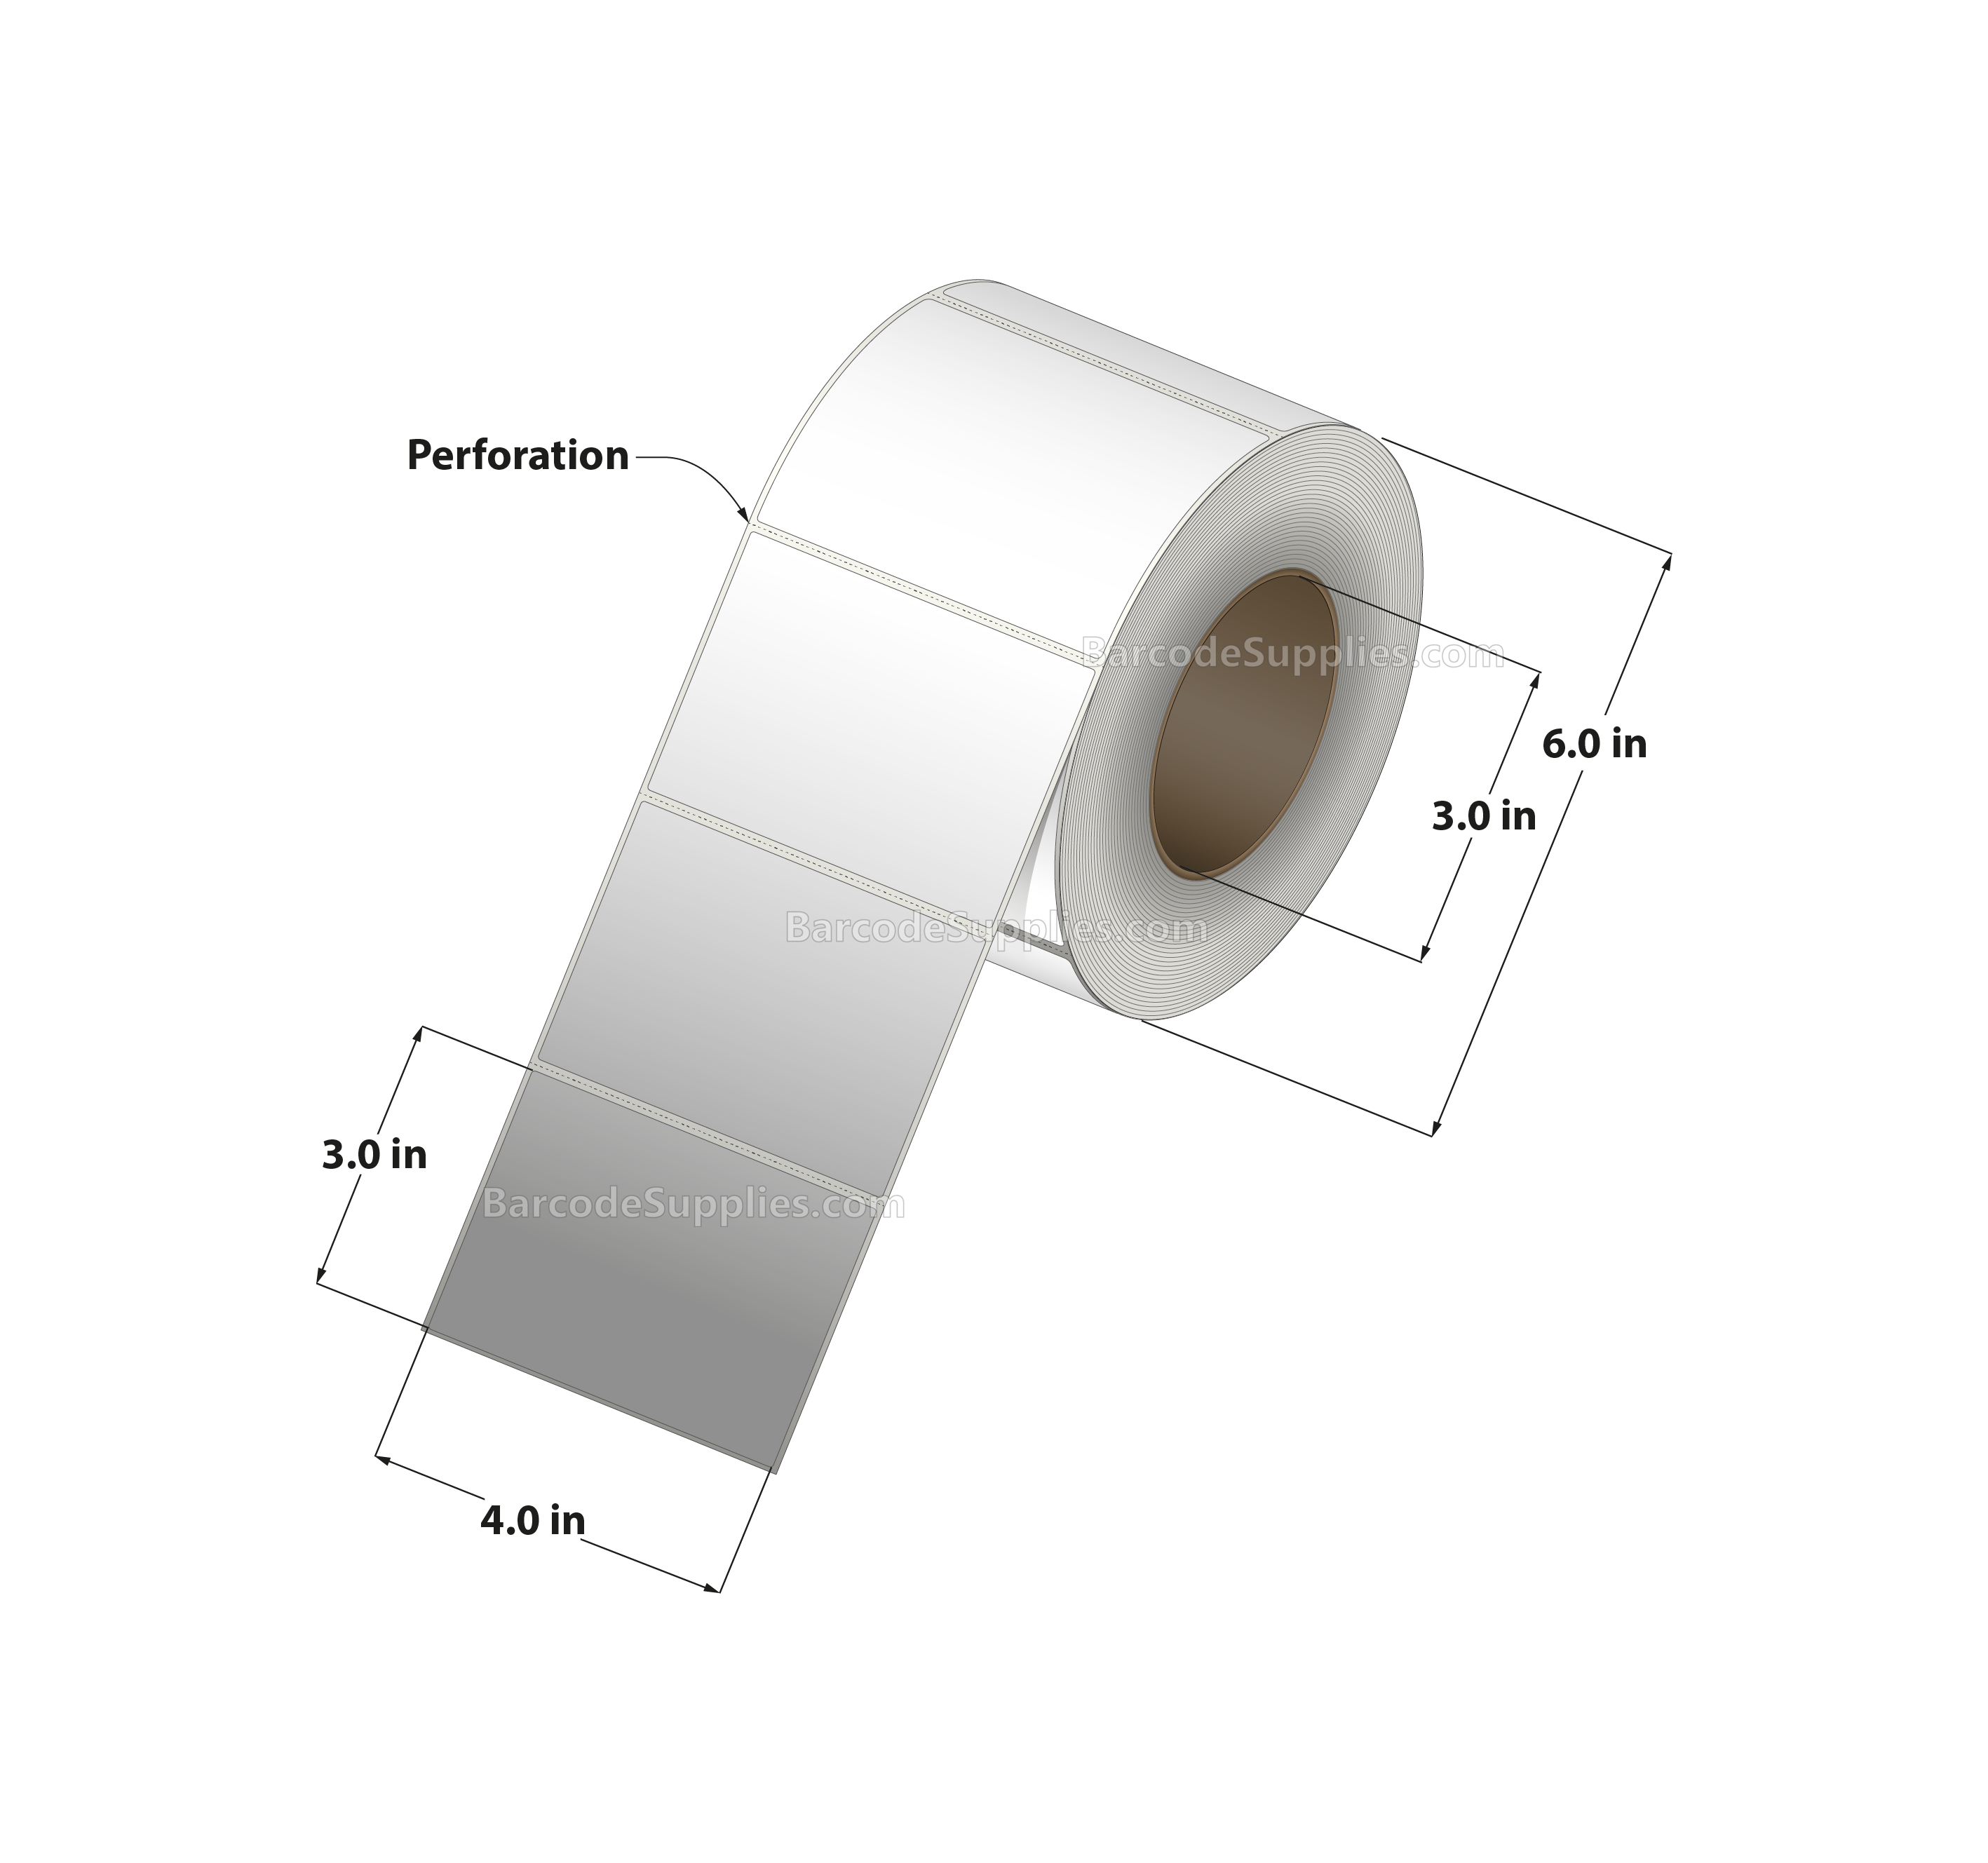 4 x 3 Thermal Transfer White Labels With Permanent Adhesive - Perforated - 975 Labels Per Roll - Carton Of 8 Rolls - 7800 Labels Total - MPN: RT-4-3-975-3